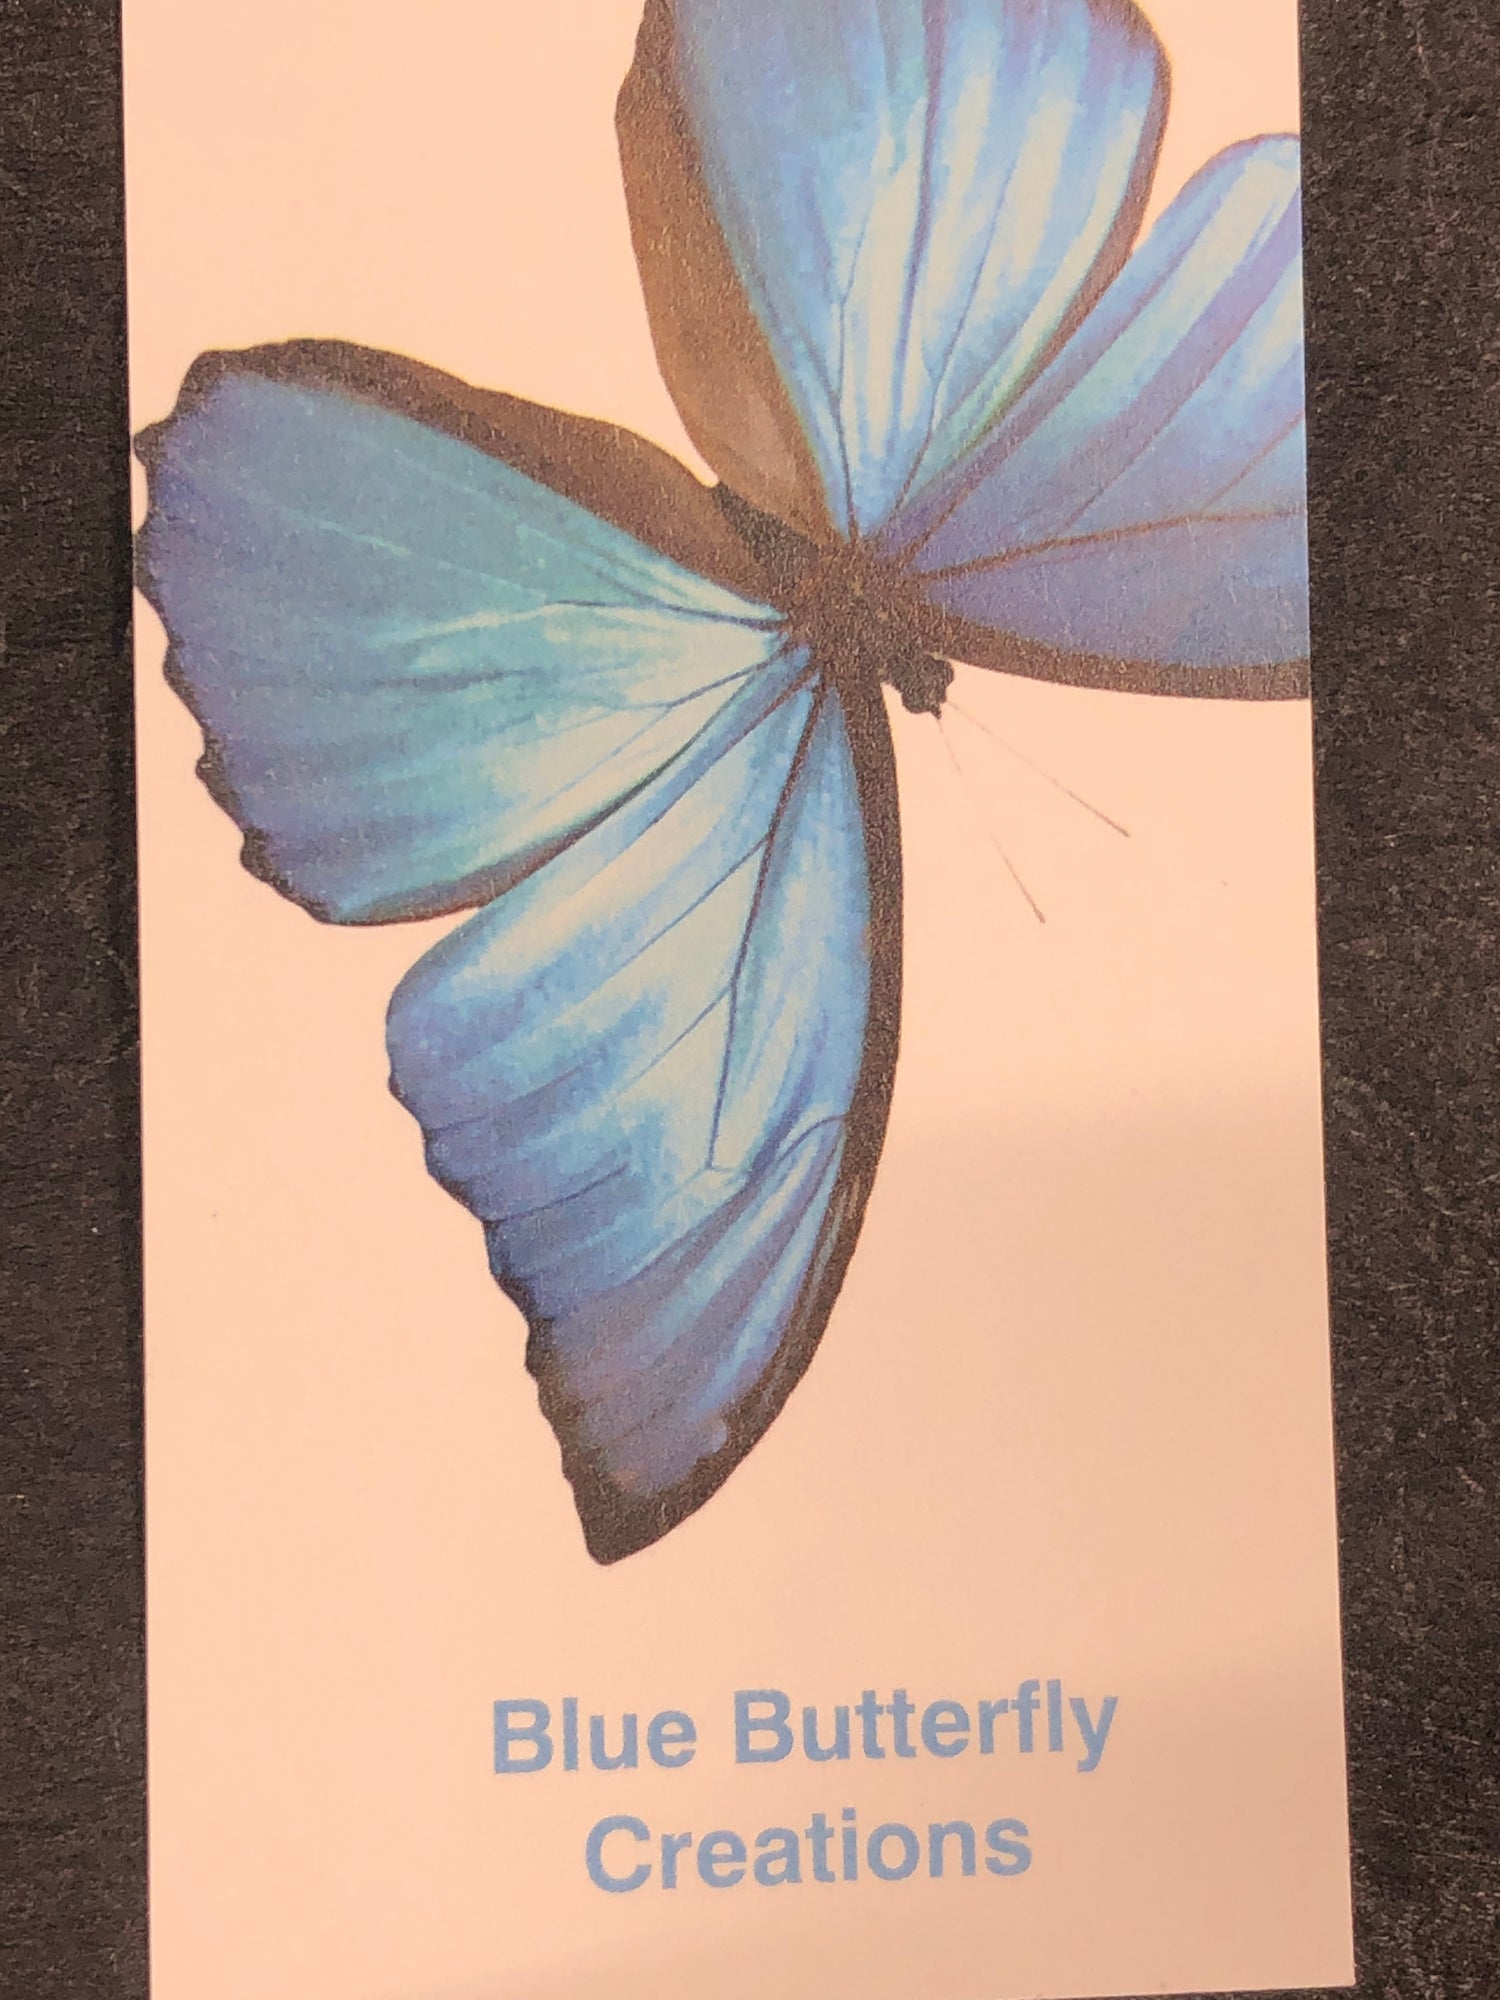 Blue Butterfly Creations